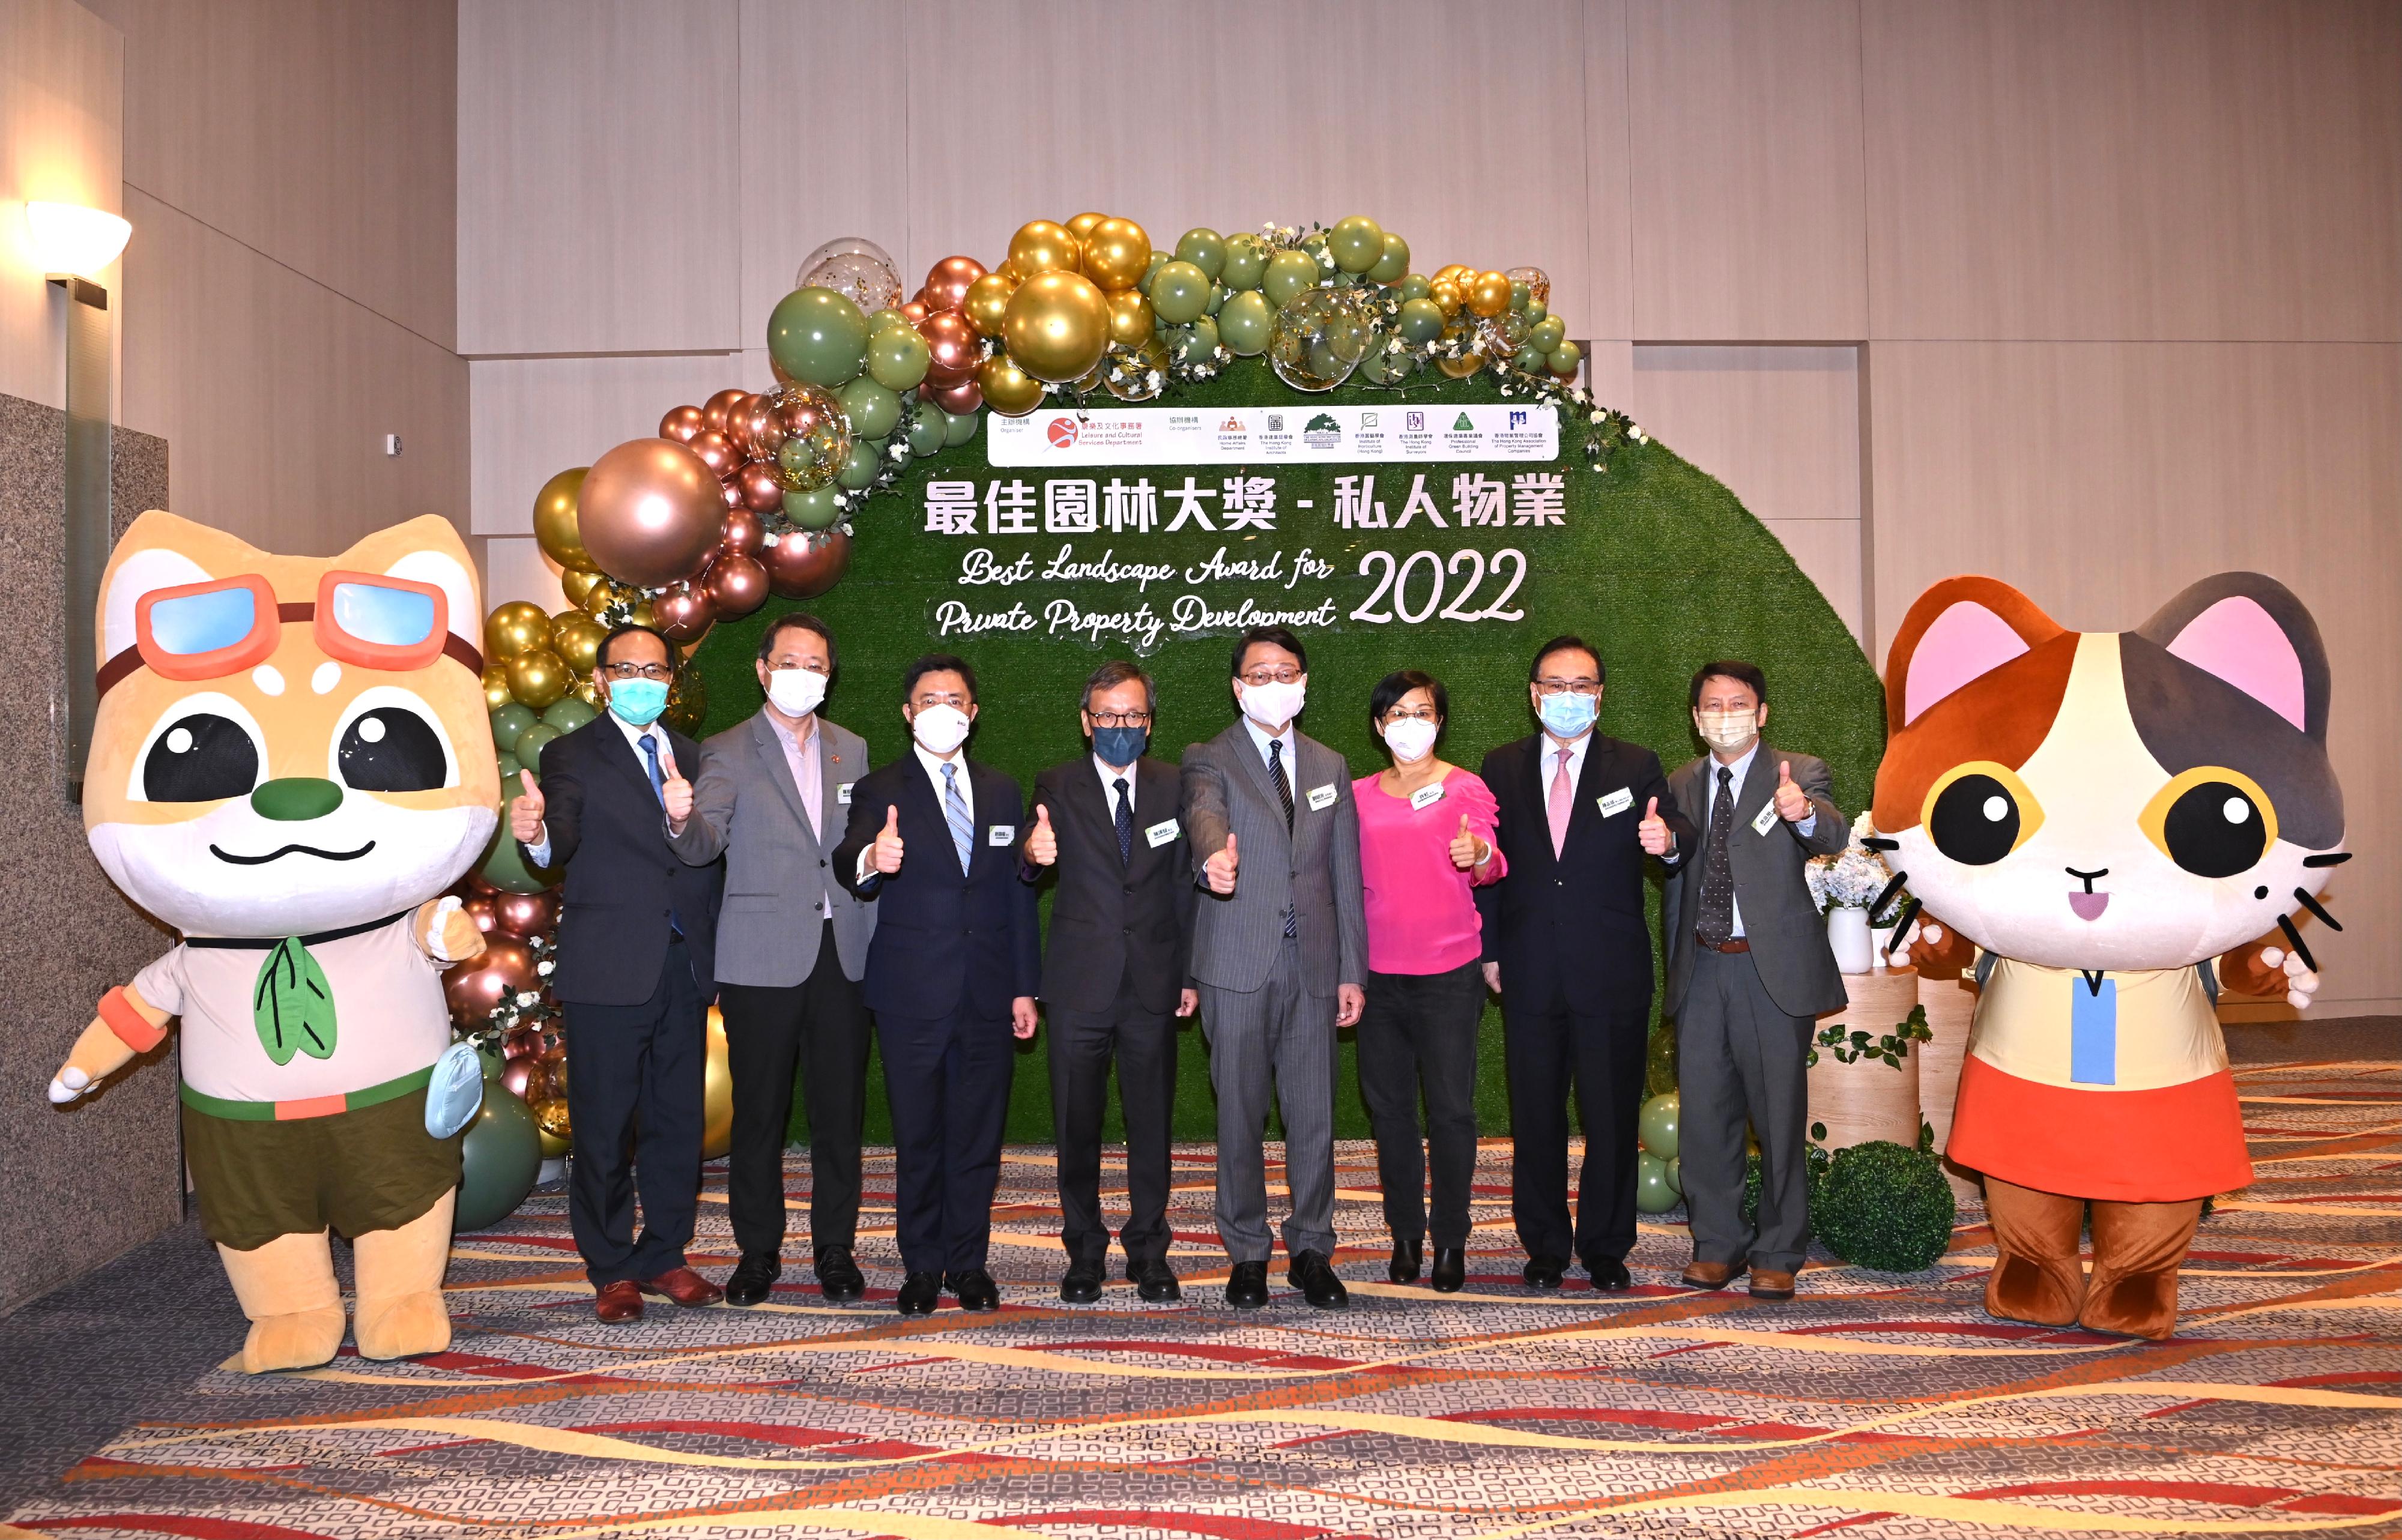 The winners of the Best Landscape Award for Private Property Development 2022, organised by the Leisure and Cultural Services Department, were announced at a prize presentation ceremony today (November 17) to commend organisations for their efforts in greening. Photo shows the Director of Leisure and Cultural Services, Mr Vincent Liu (fourth right), together with other officiating guests.